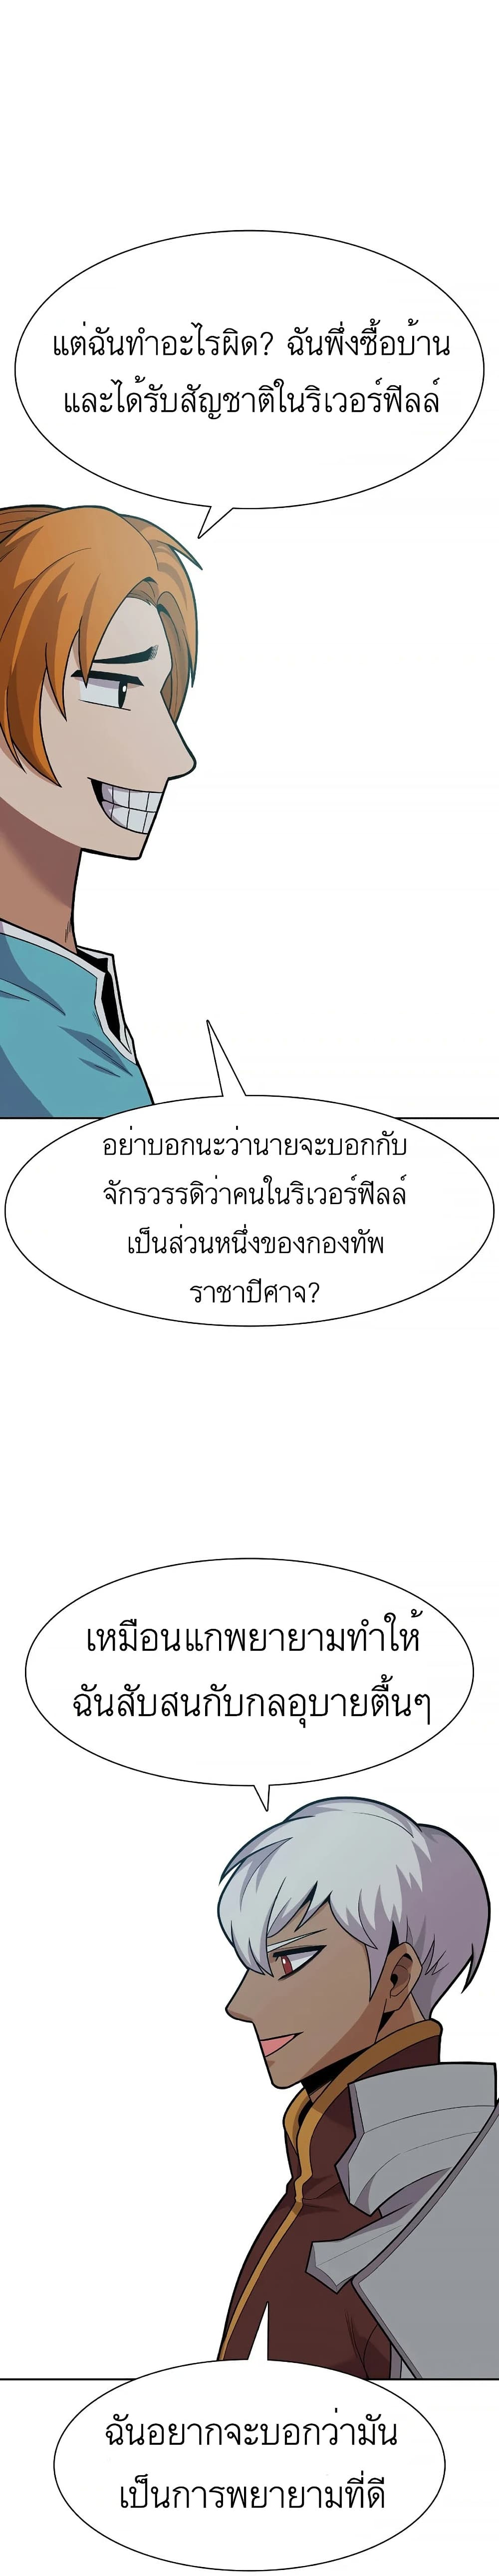 Raising Newbie Heroes In Another World ตอนที่ 14 (23)